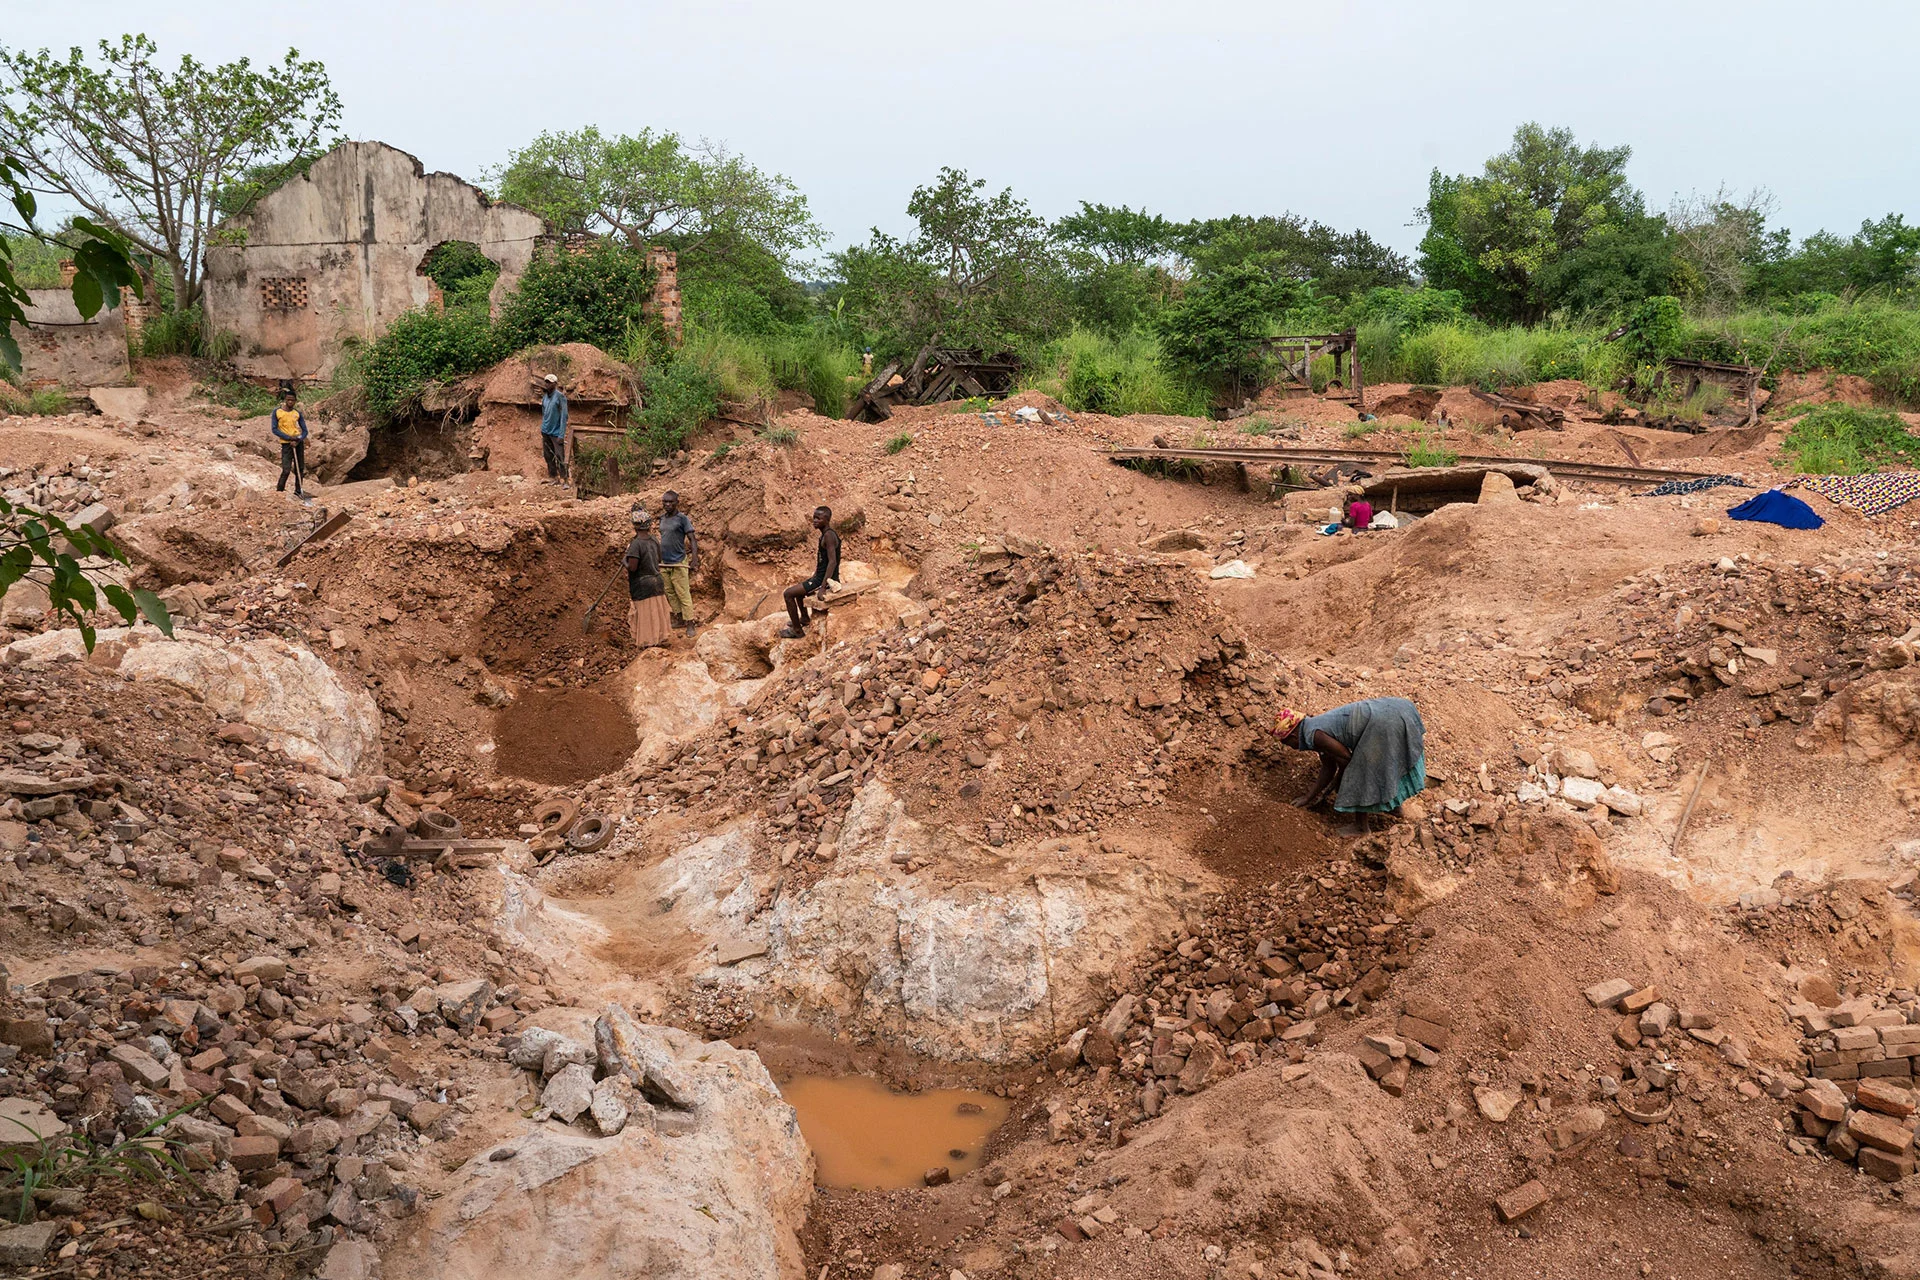 The site of the artisanal cassiterite mine of Lukushi in Manono. The Democratic Republic of Congo is rich with Lithium, an essential mineral for electric car batteries, which nests in the remains of the former mining town of the city of Manono in the south-east of the country in the province of Tanganyika. To get out of poverty, the inhabitants of Manono, most of whom are artisanal diggers, place their hope in the investment of the Australian company AVZ minerals, which plans to invest 600 million dollars in lithium mining. (Junior Kannah/ Contributor/ AFP/ Getty Images)